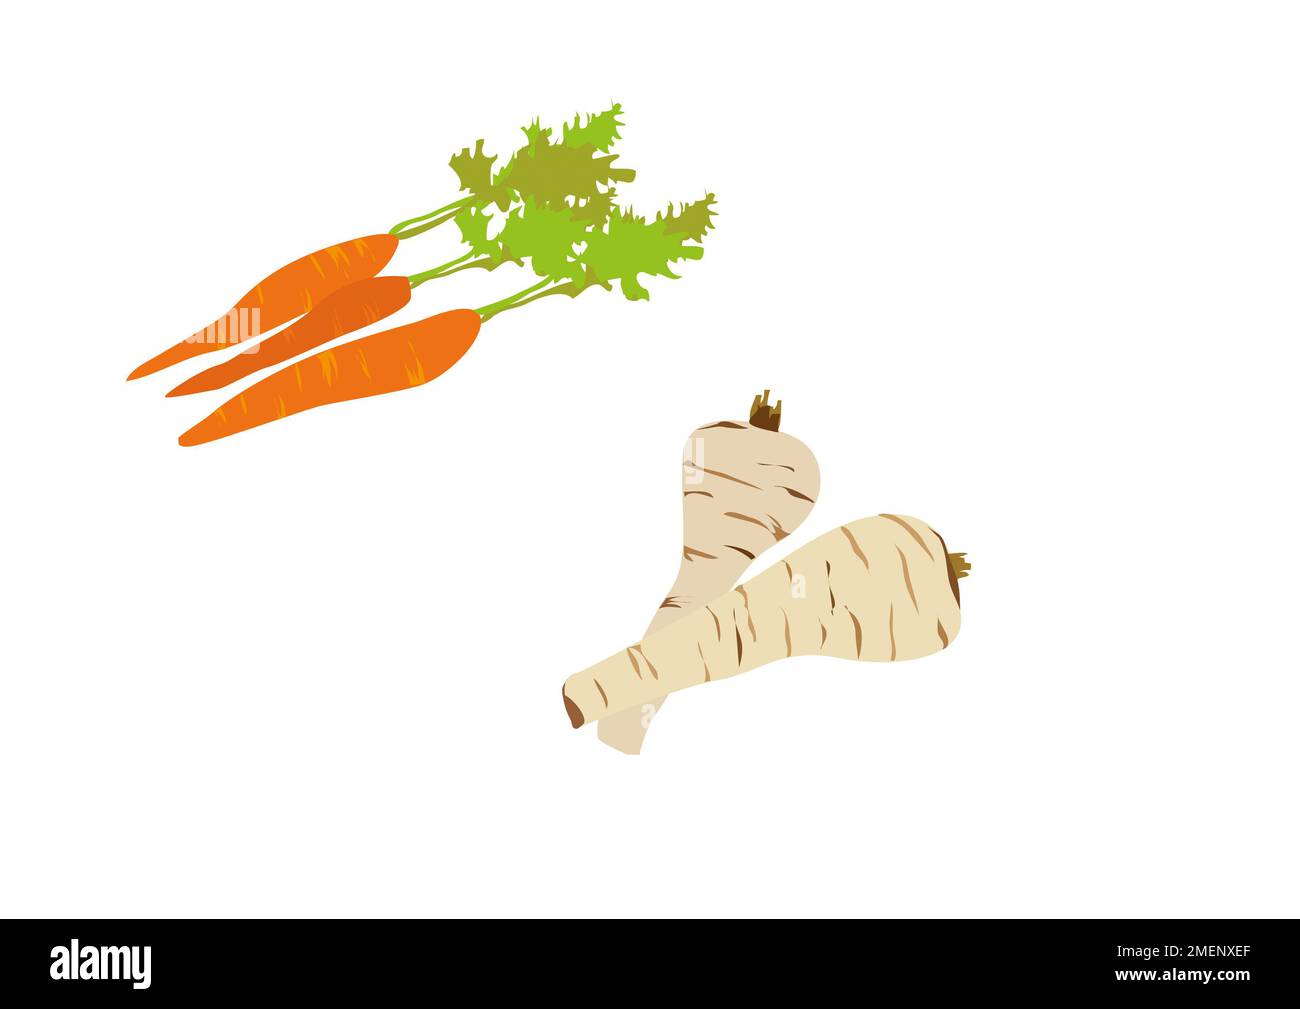 Illustration of carrots and parsnips Stock Photo